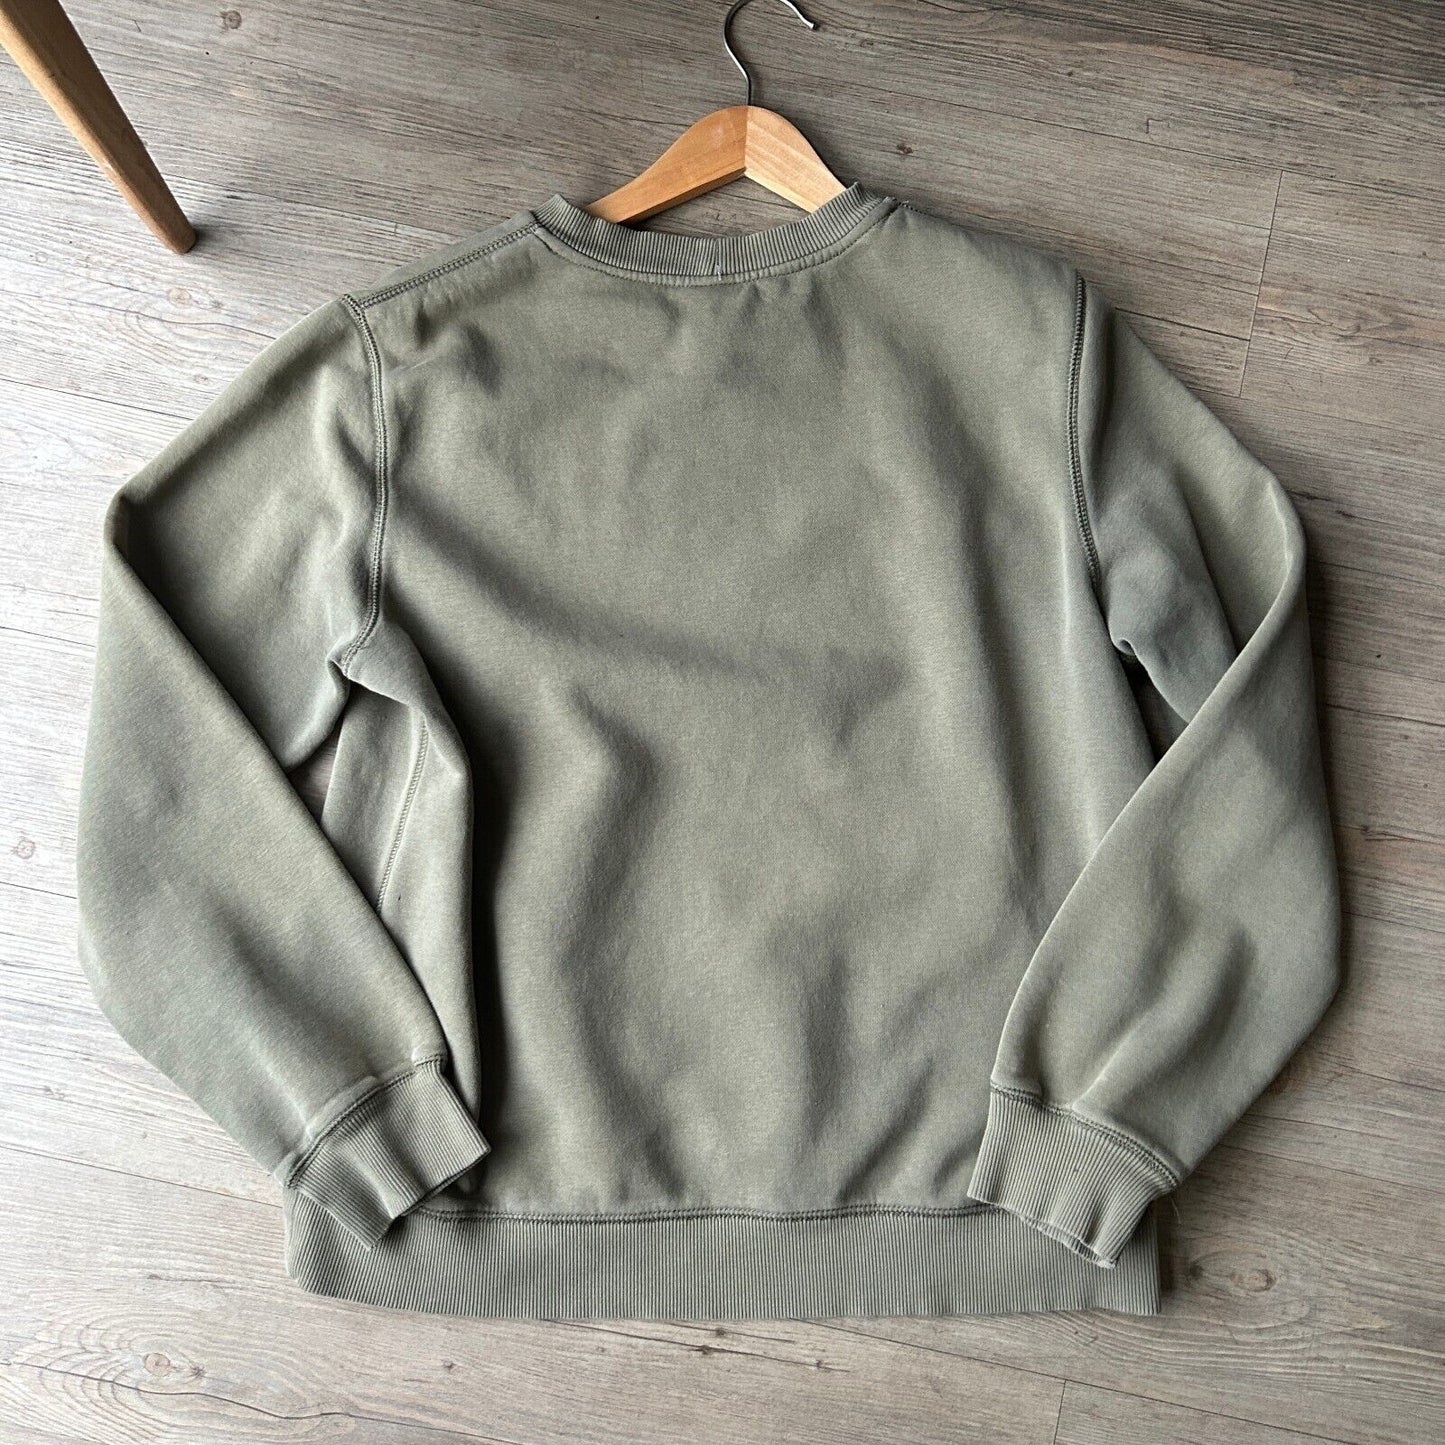 VINTAGE | NIKE Embroidered Small Swoosh Olive Green Crewneck Sweater sz M Adult